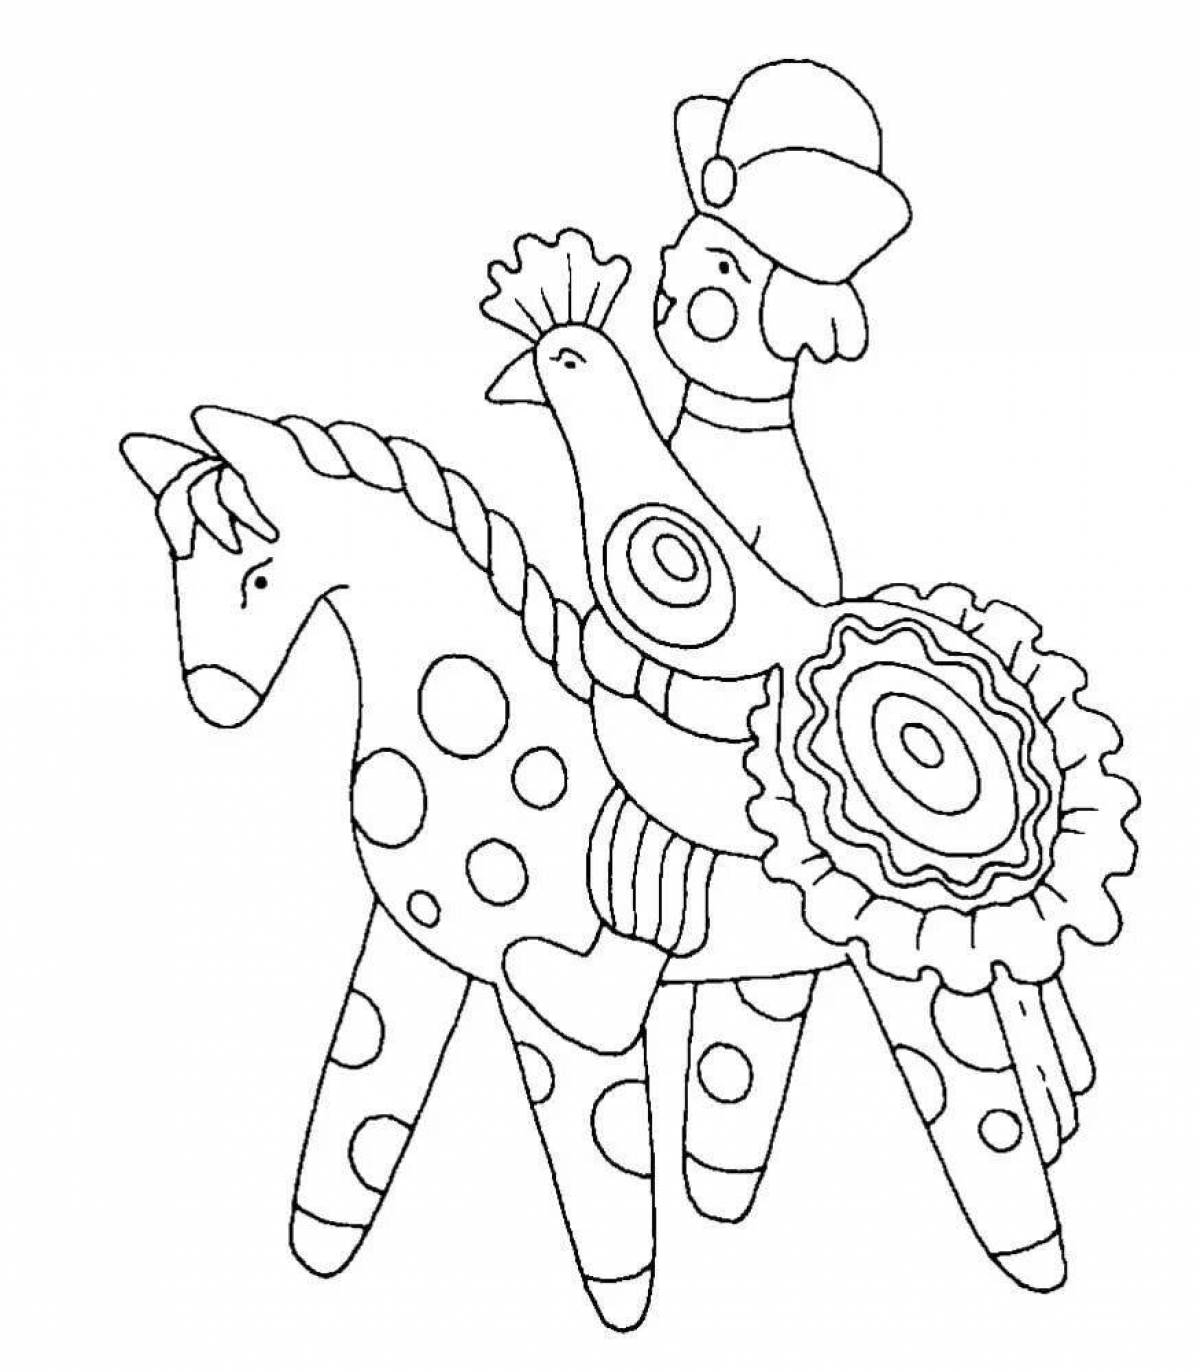 Playful Filimonov toy coloring book